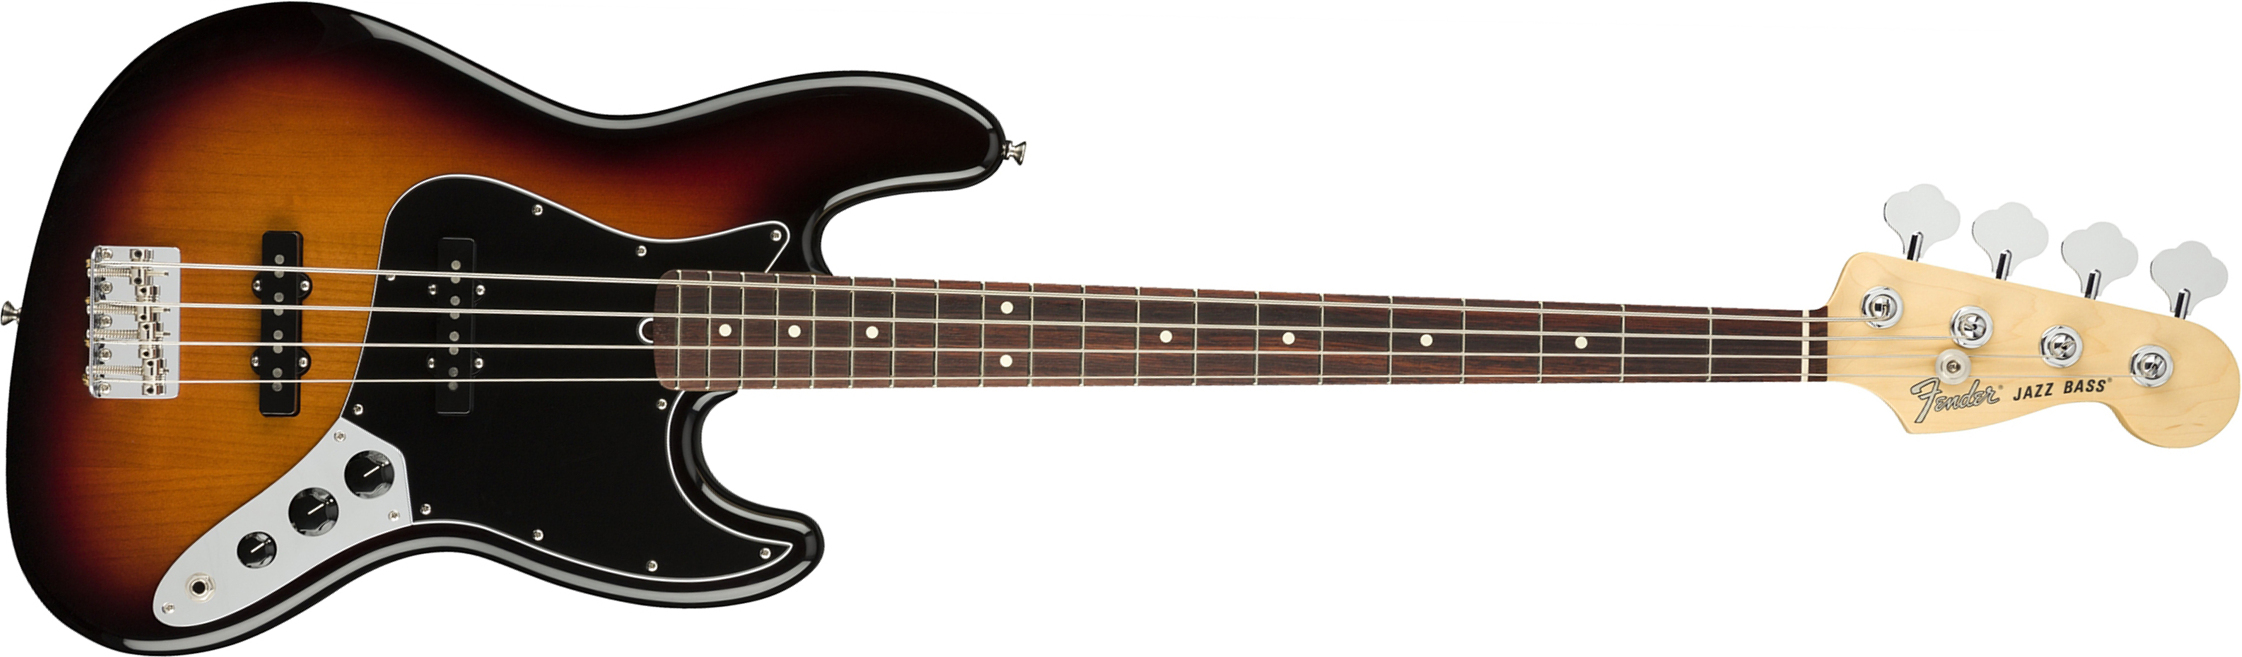 Fender Jazz Bass American Performer Usa Rw - 3-color Sunburst - Solid body electric bass - Main picture